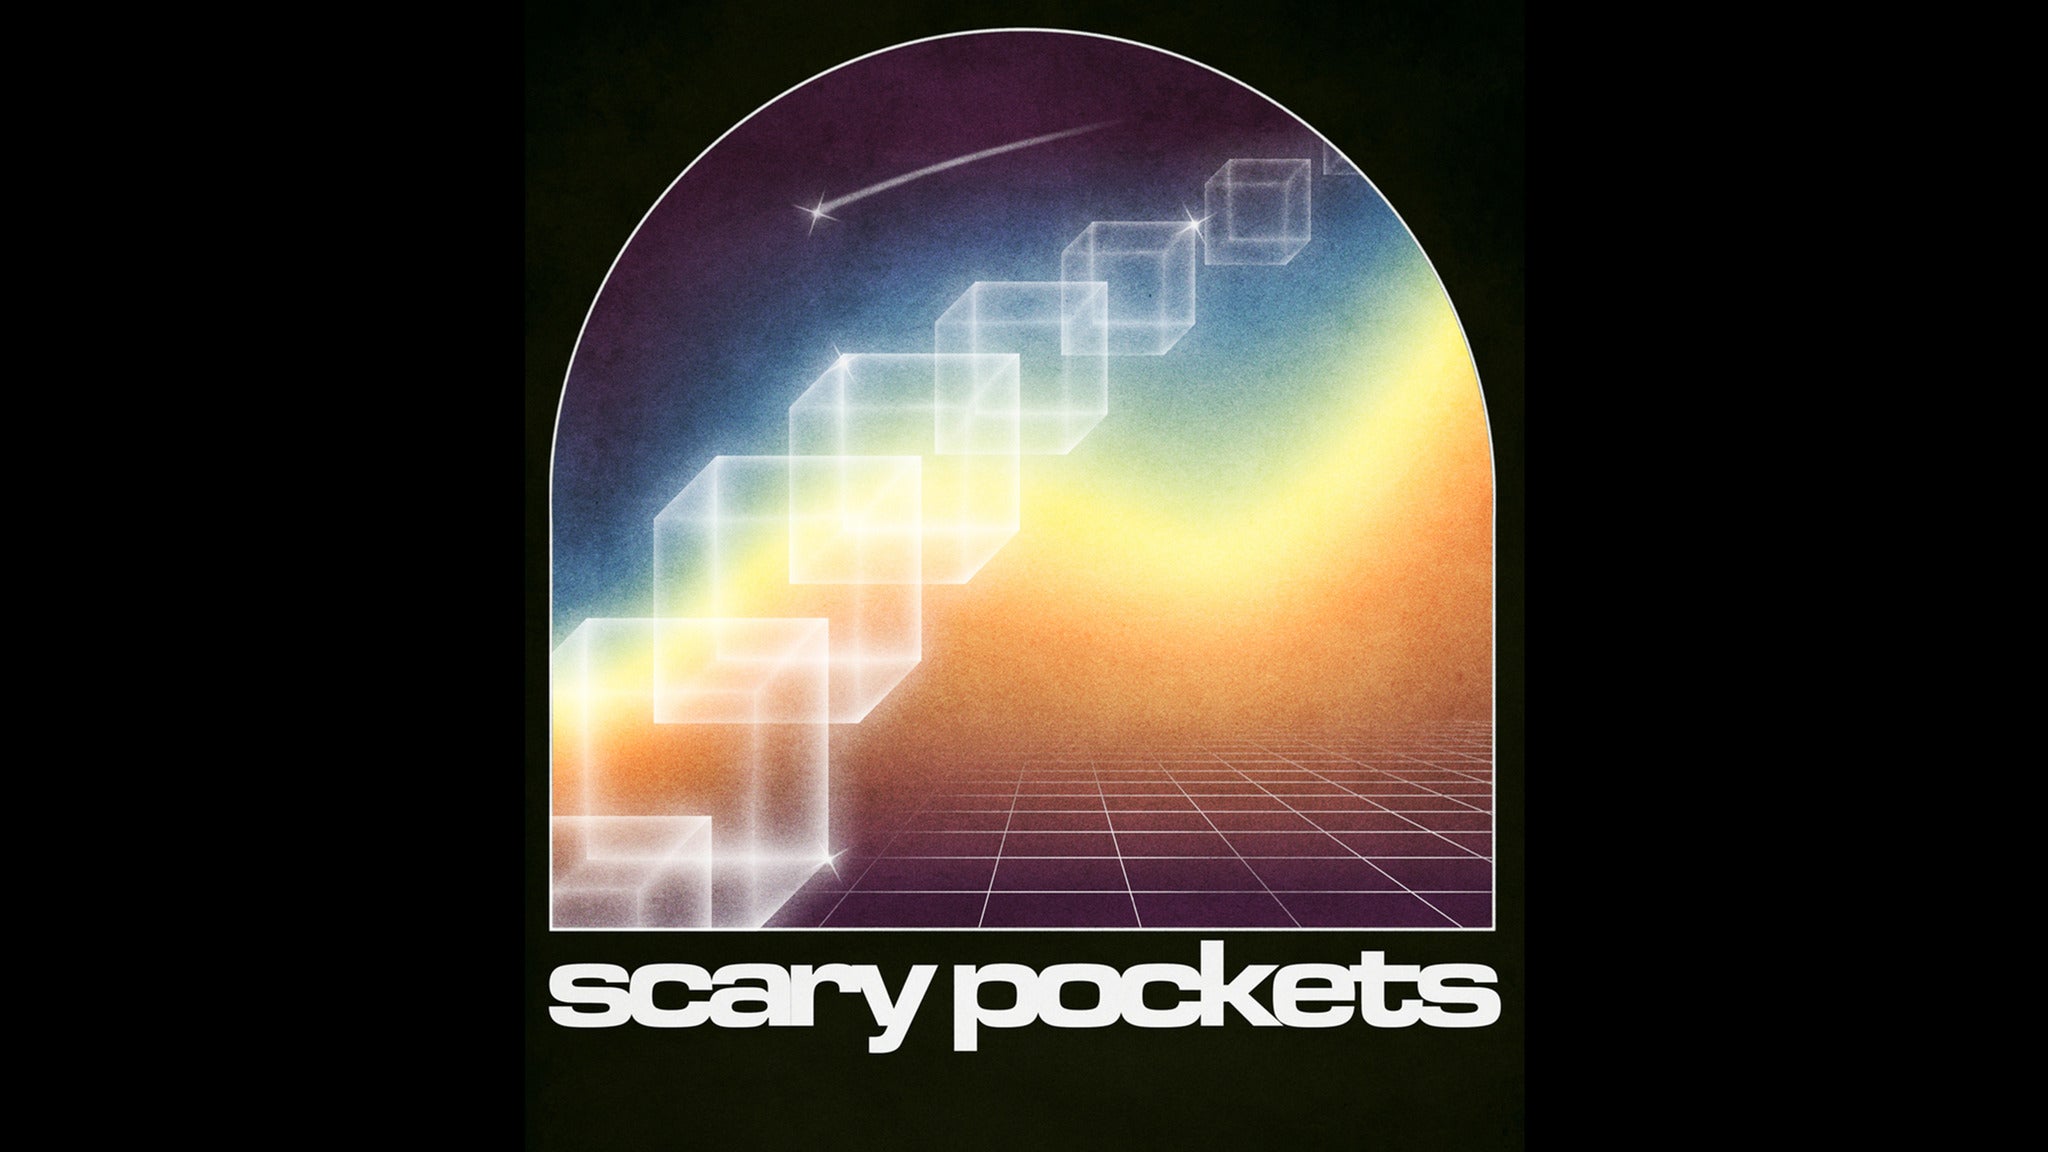 Scary Pockets in Brooklyn promo photo for Patreon / Artist presale offer code